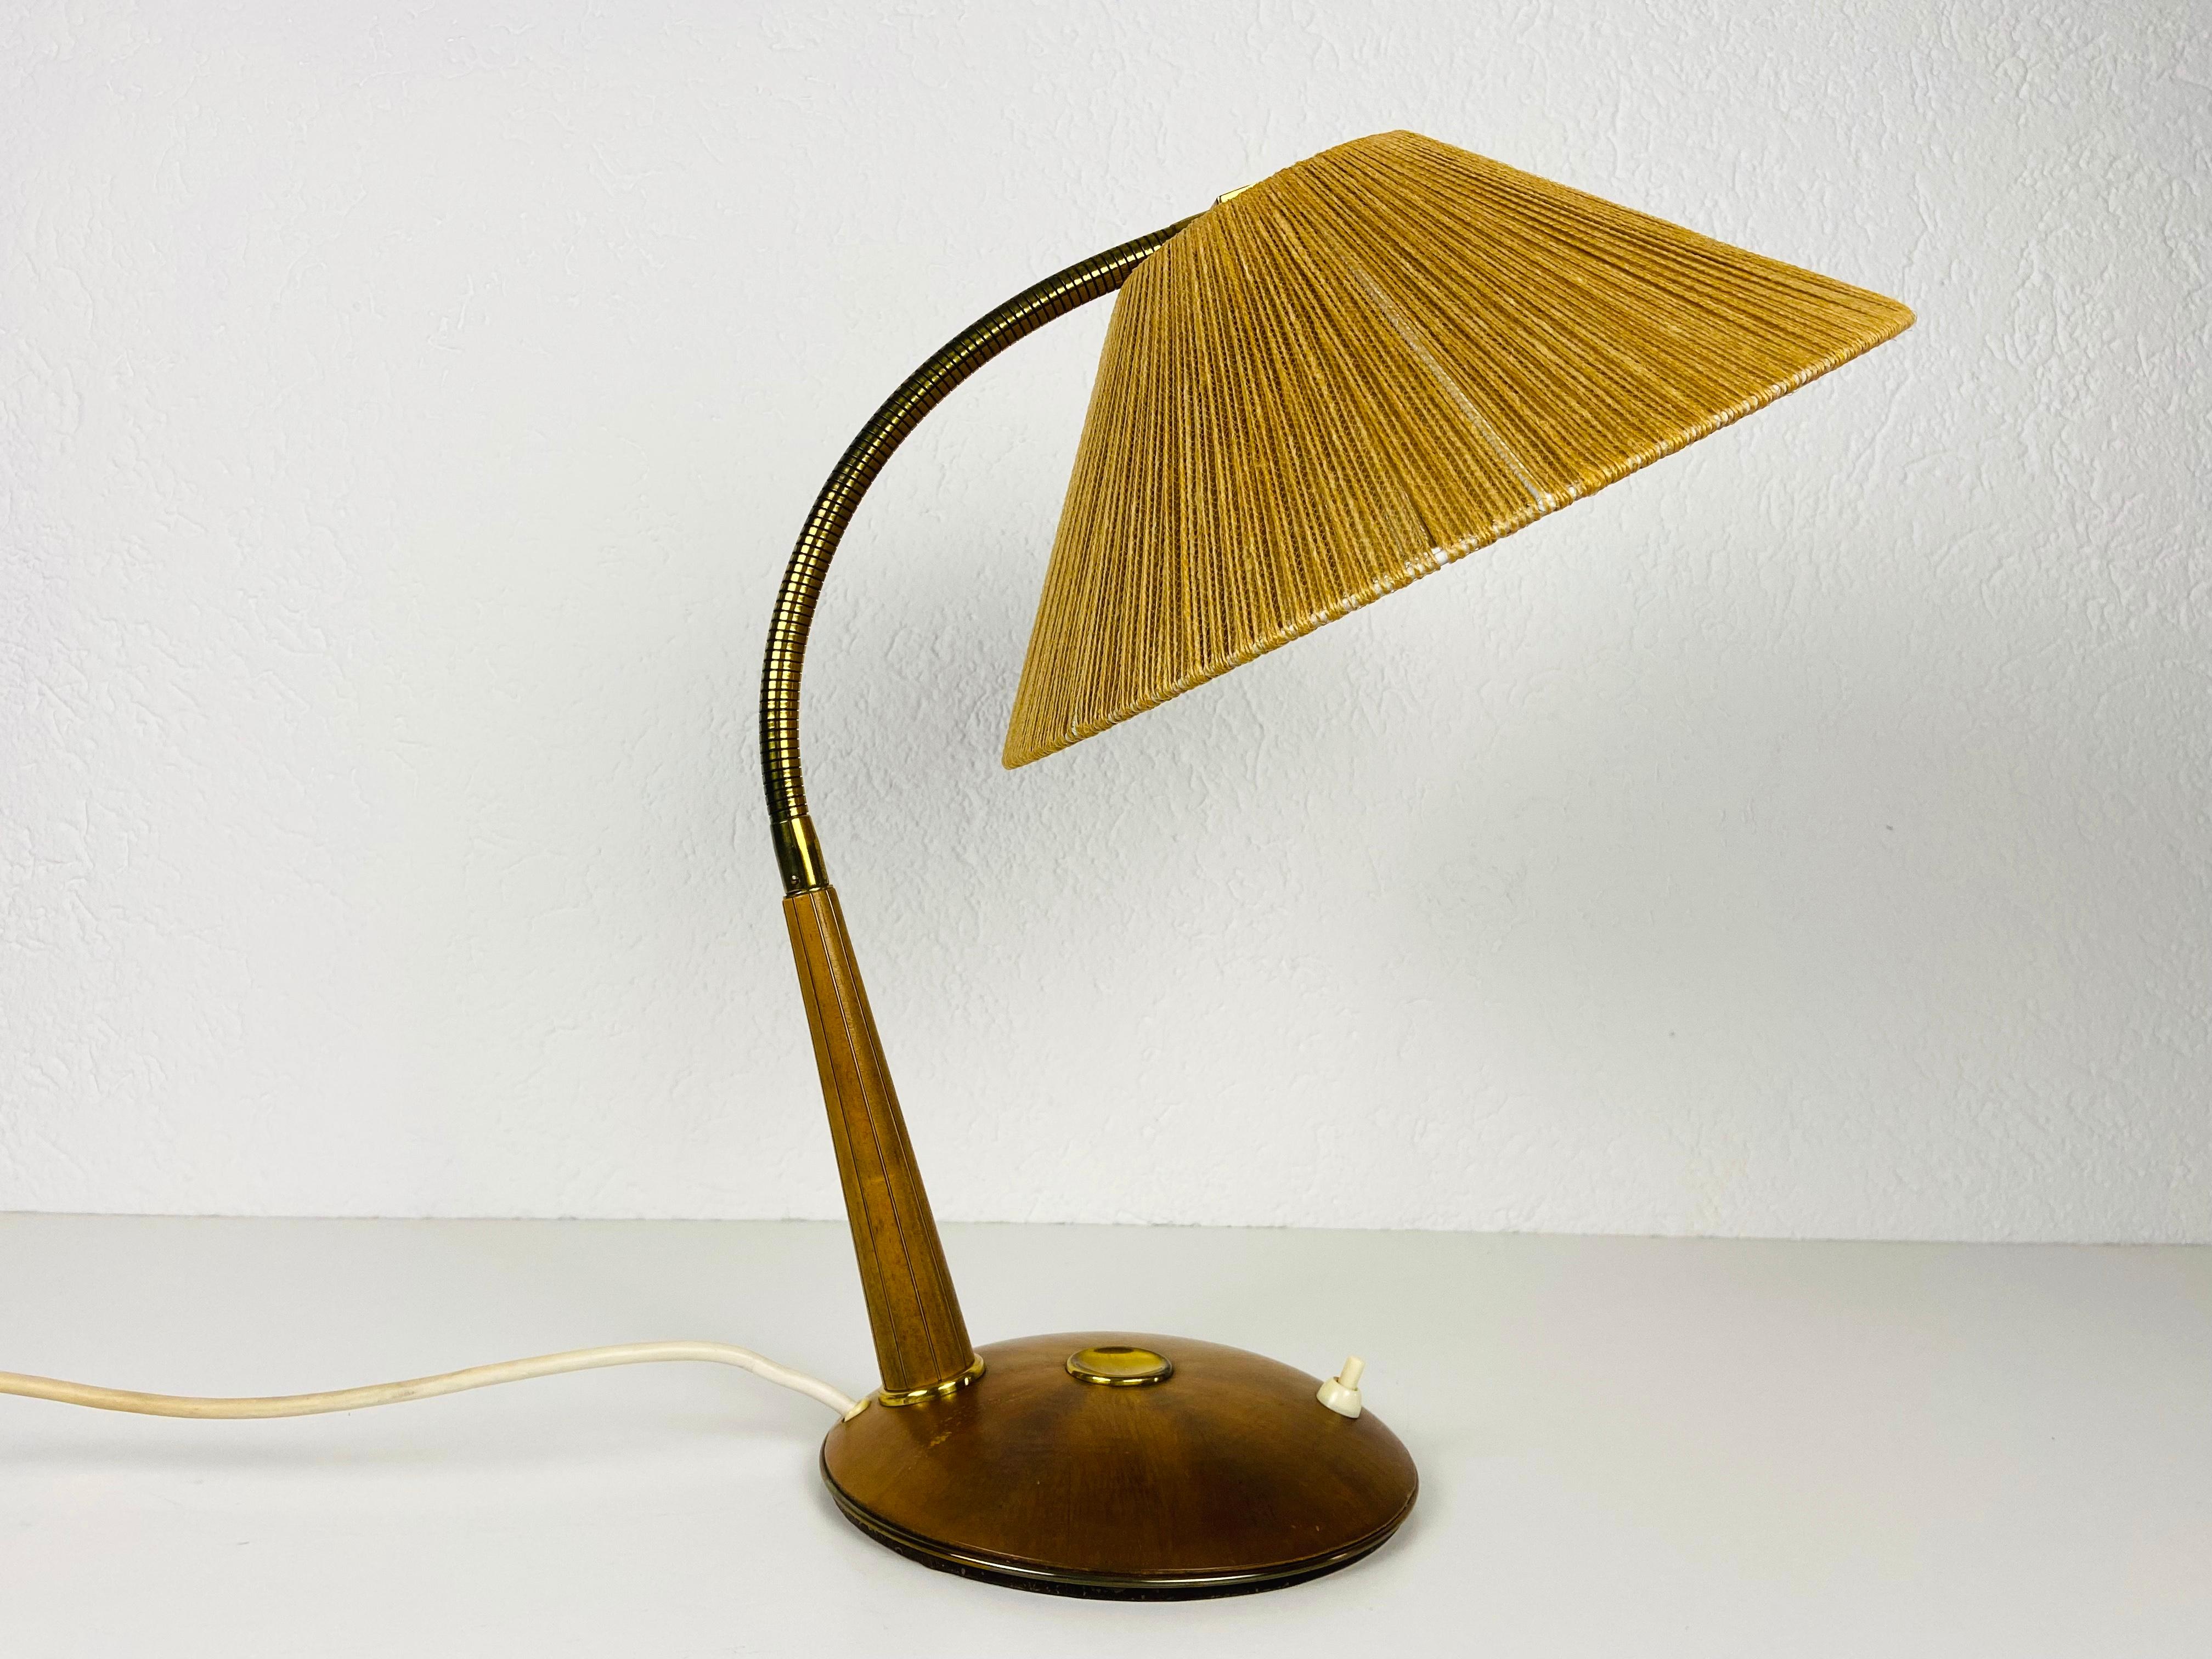 Midcentury Teak and Rattan Table Lamp by Temde, circa 1970 For Sale 3